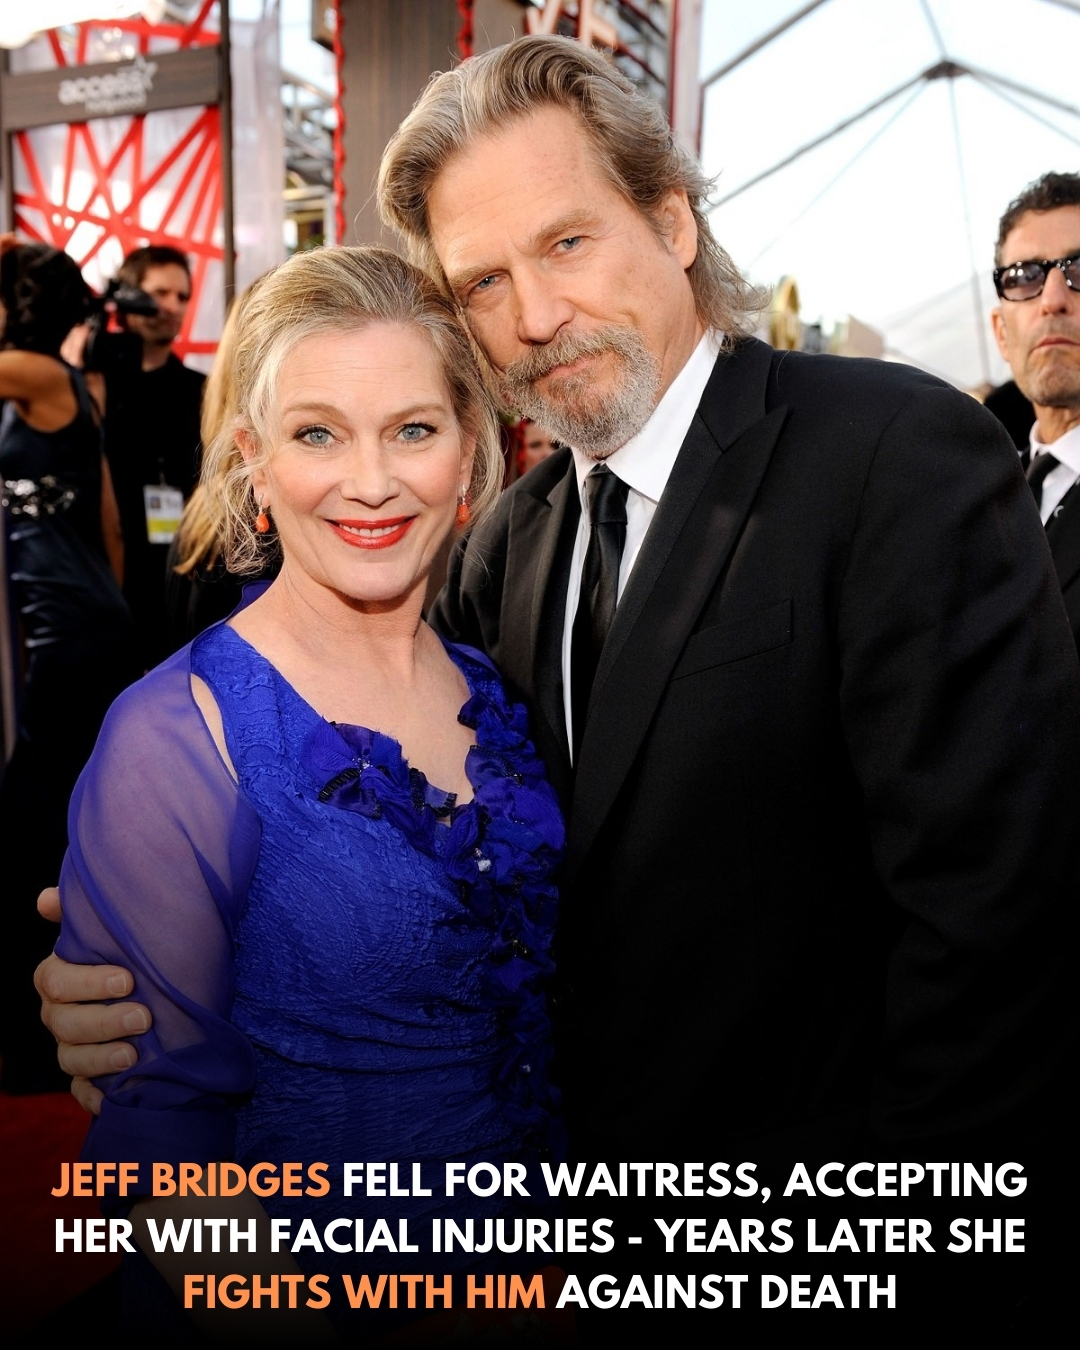 JEFF BRIDGES FELL FOR WAITRESS, ACCEPTING HER WITH FACIAL INJURIES — YEARS LATER SHE DOESN’T LEAVE HIM WHEN DEATH LOOMS